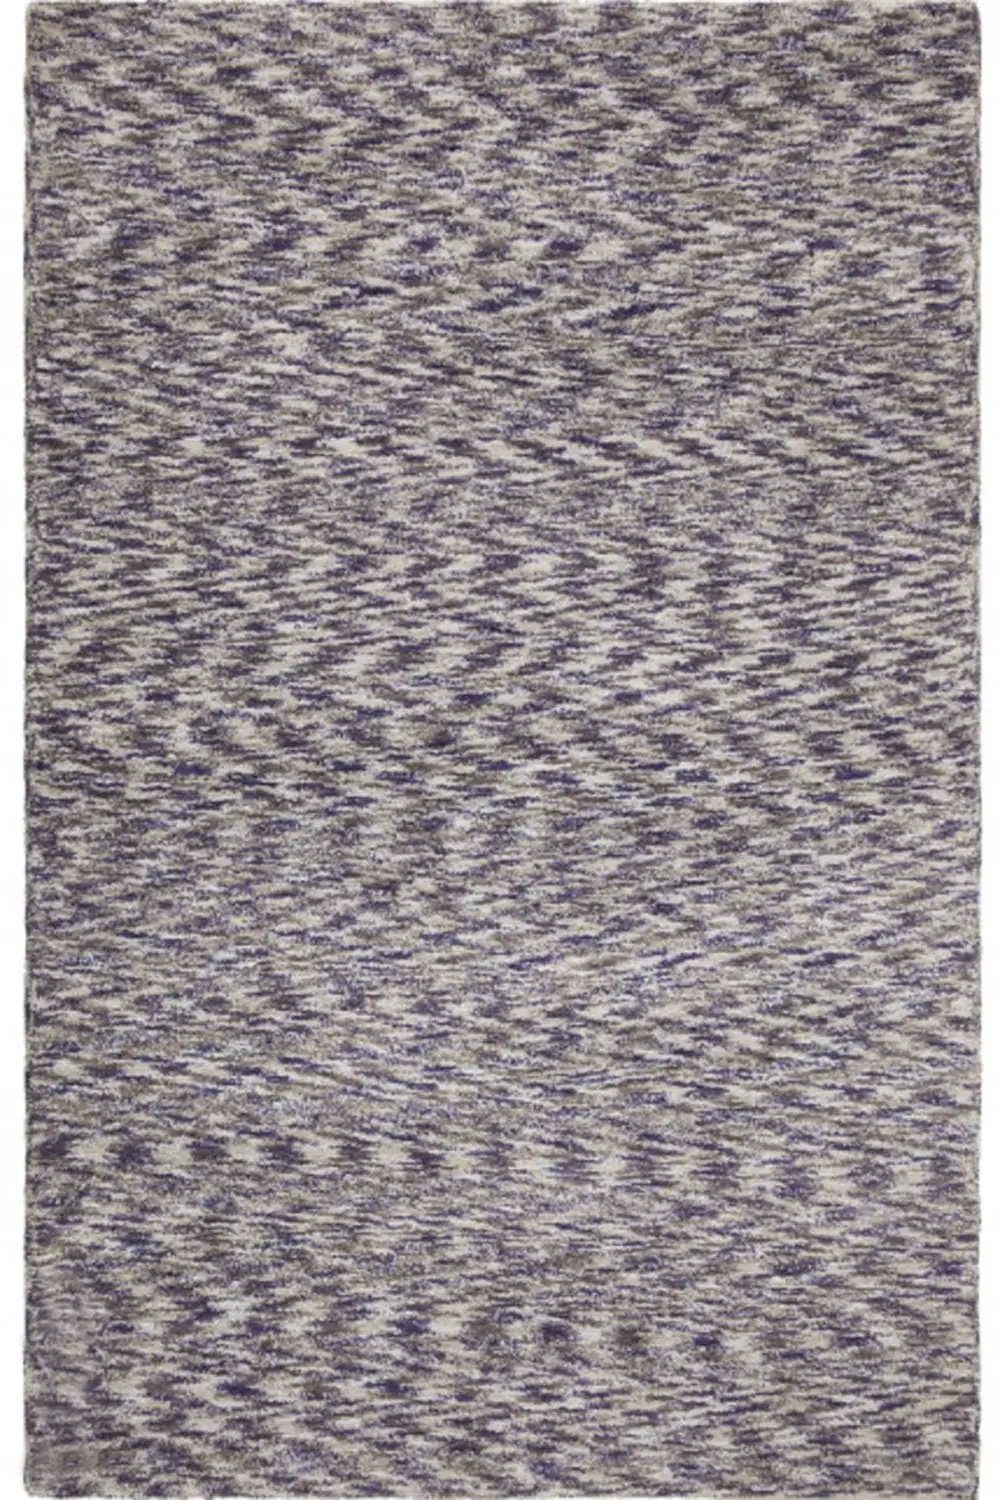 C-MIX-S-ARIAN 3 x 5 Small Mix Arian Linen and Navy Blue Washable Rug-1